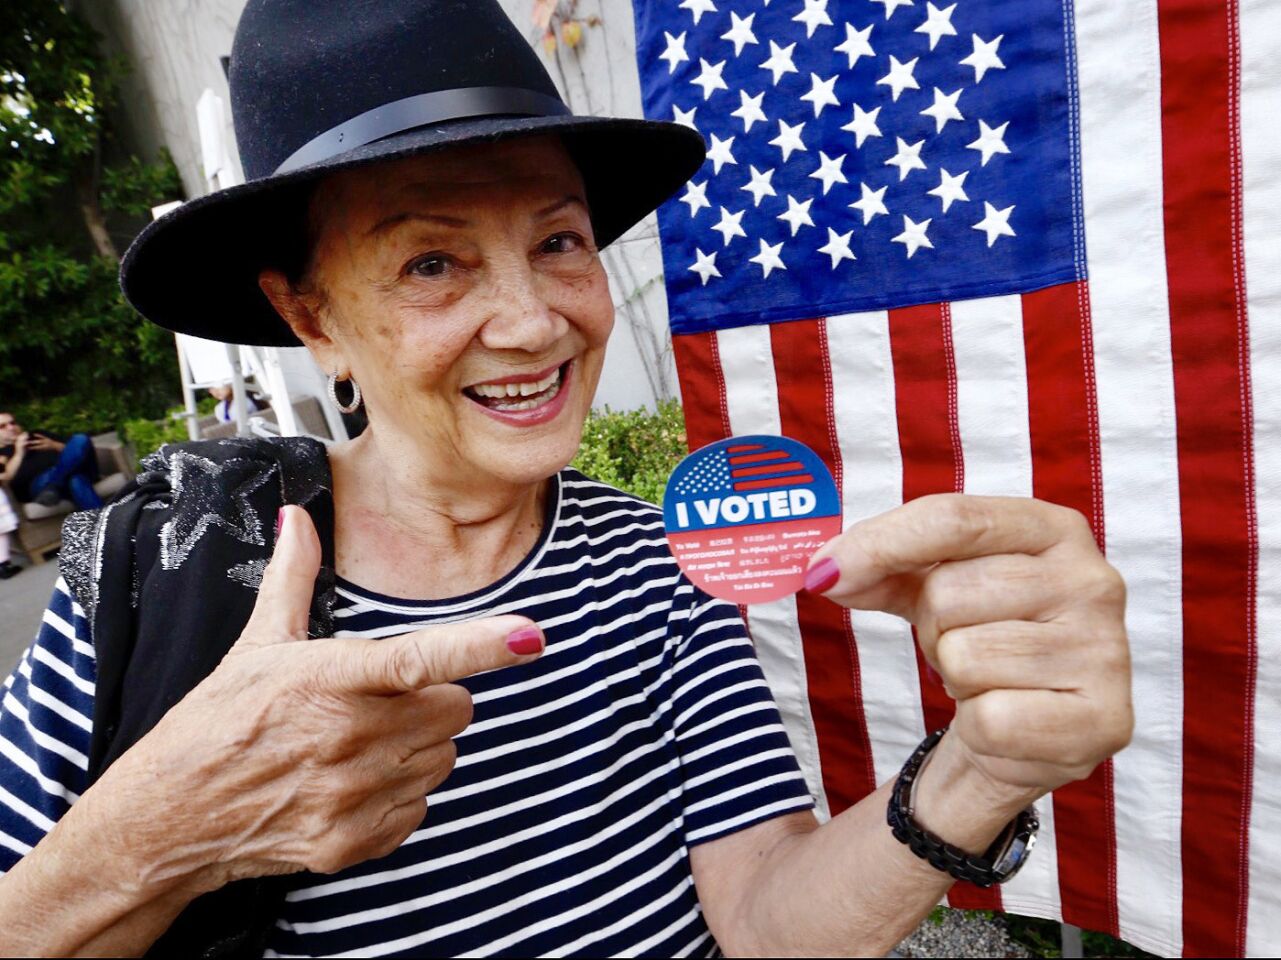 Grace Scherrer, 86, is excited to cast her ballot as the polls open at the Luxe Sunset Boulevard Hotel in Brentwood.